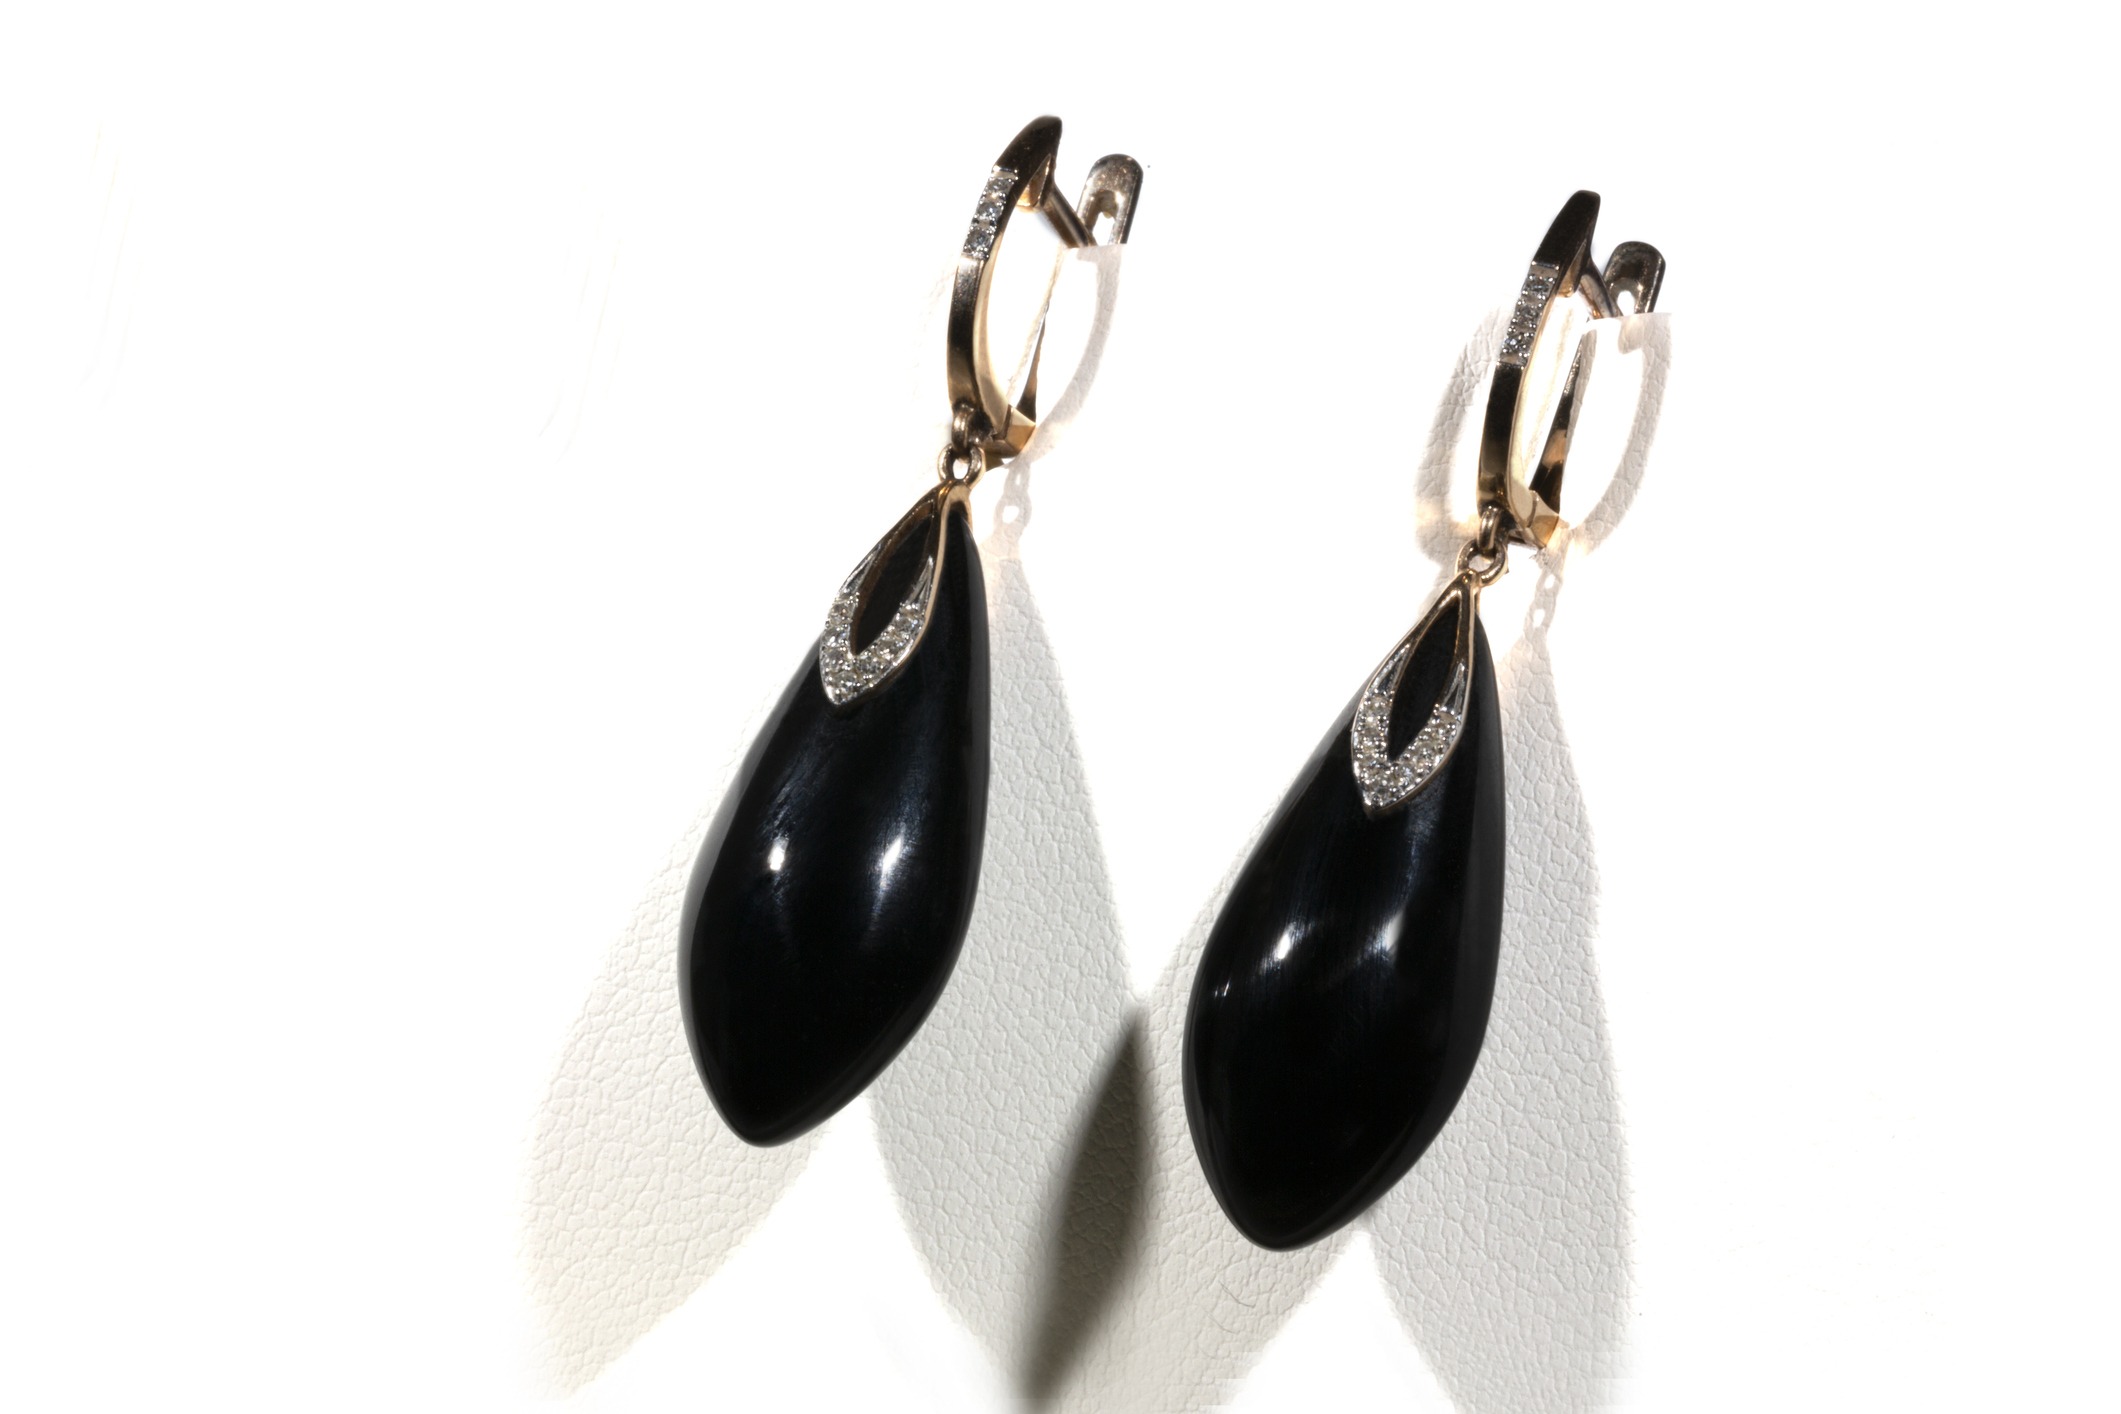 gold earrings with onyx and diamonds on a white background. Long earrings. women's accessories